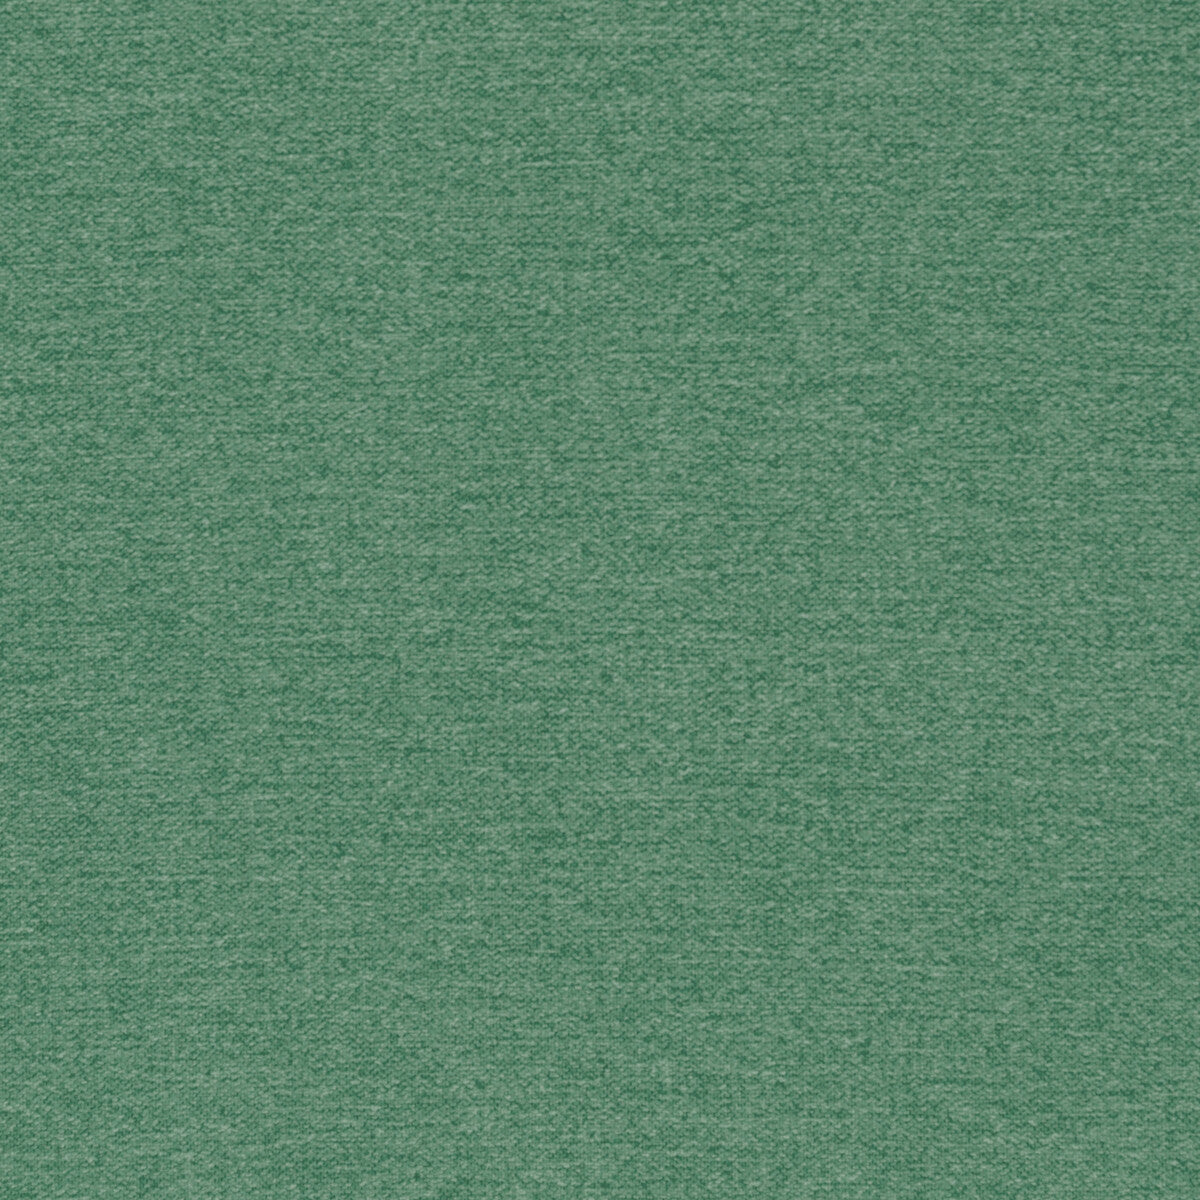 Hurdle fabric in spearmint color - pattern 36259.3.0 - by Kravet Contract in the Supreen collection